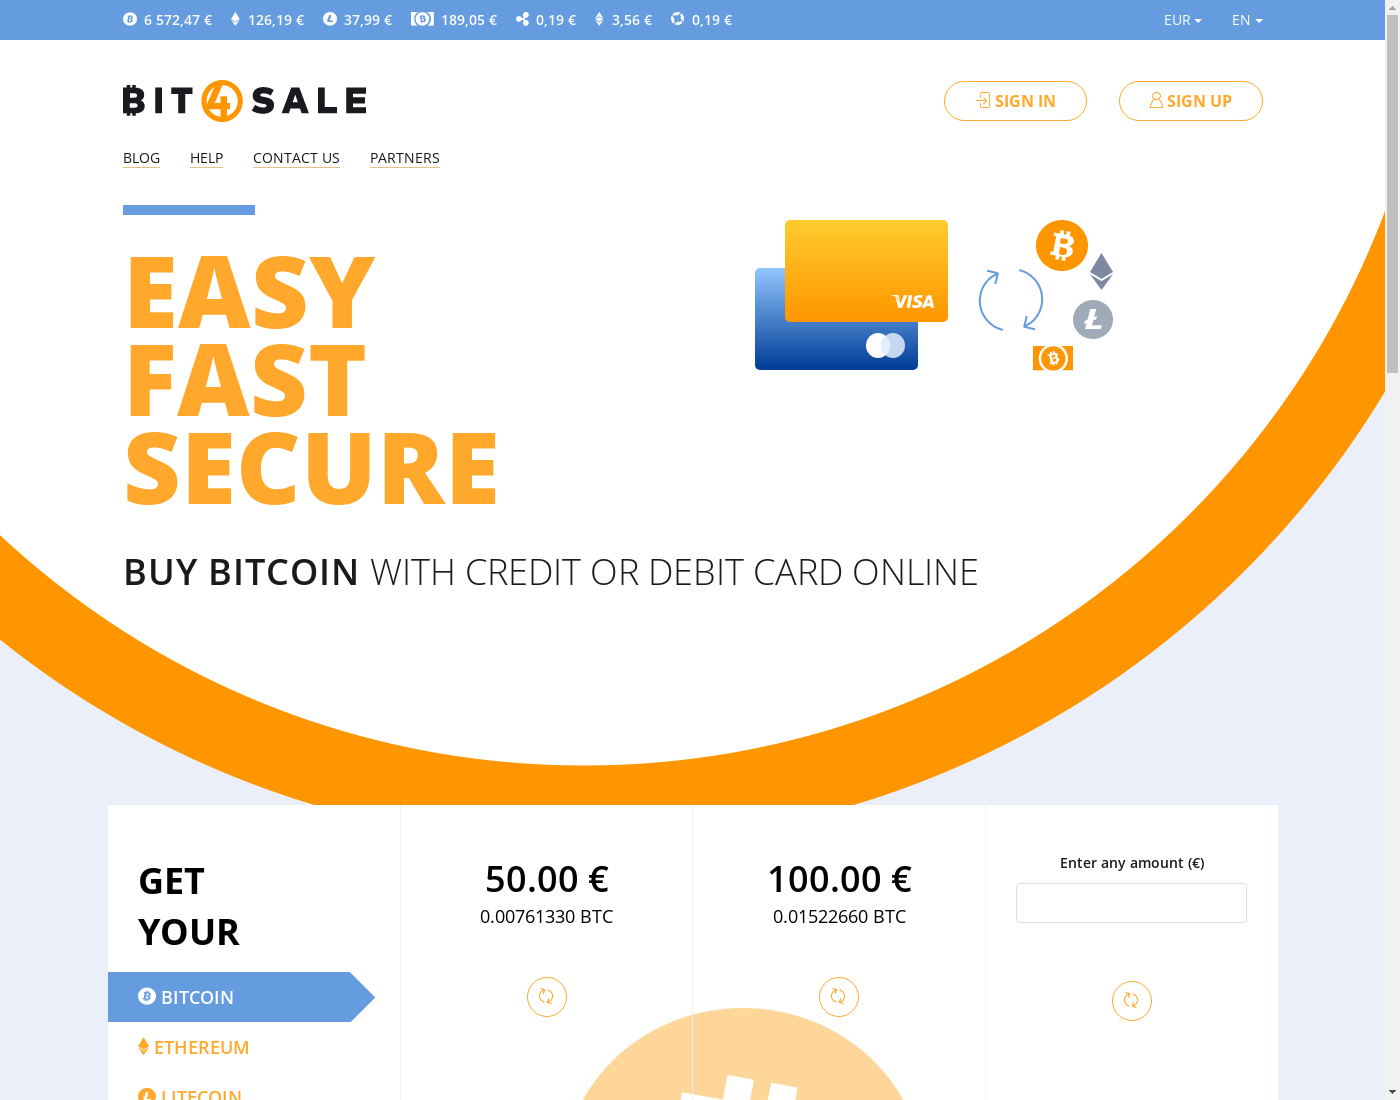 Bit4Sale user interface: the home page in English